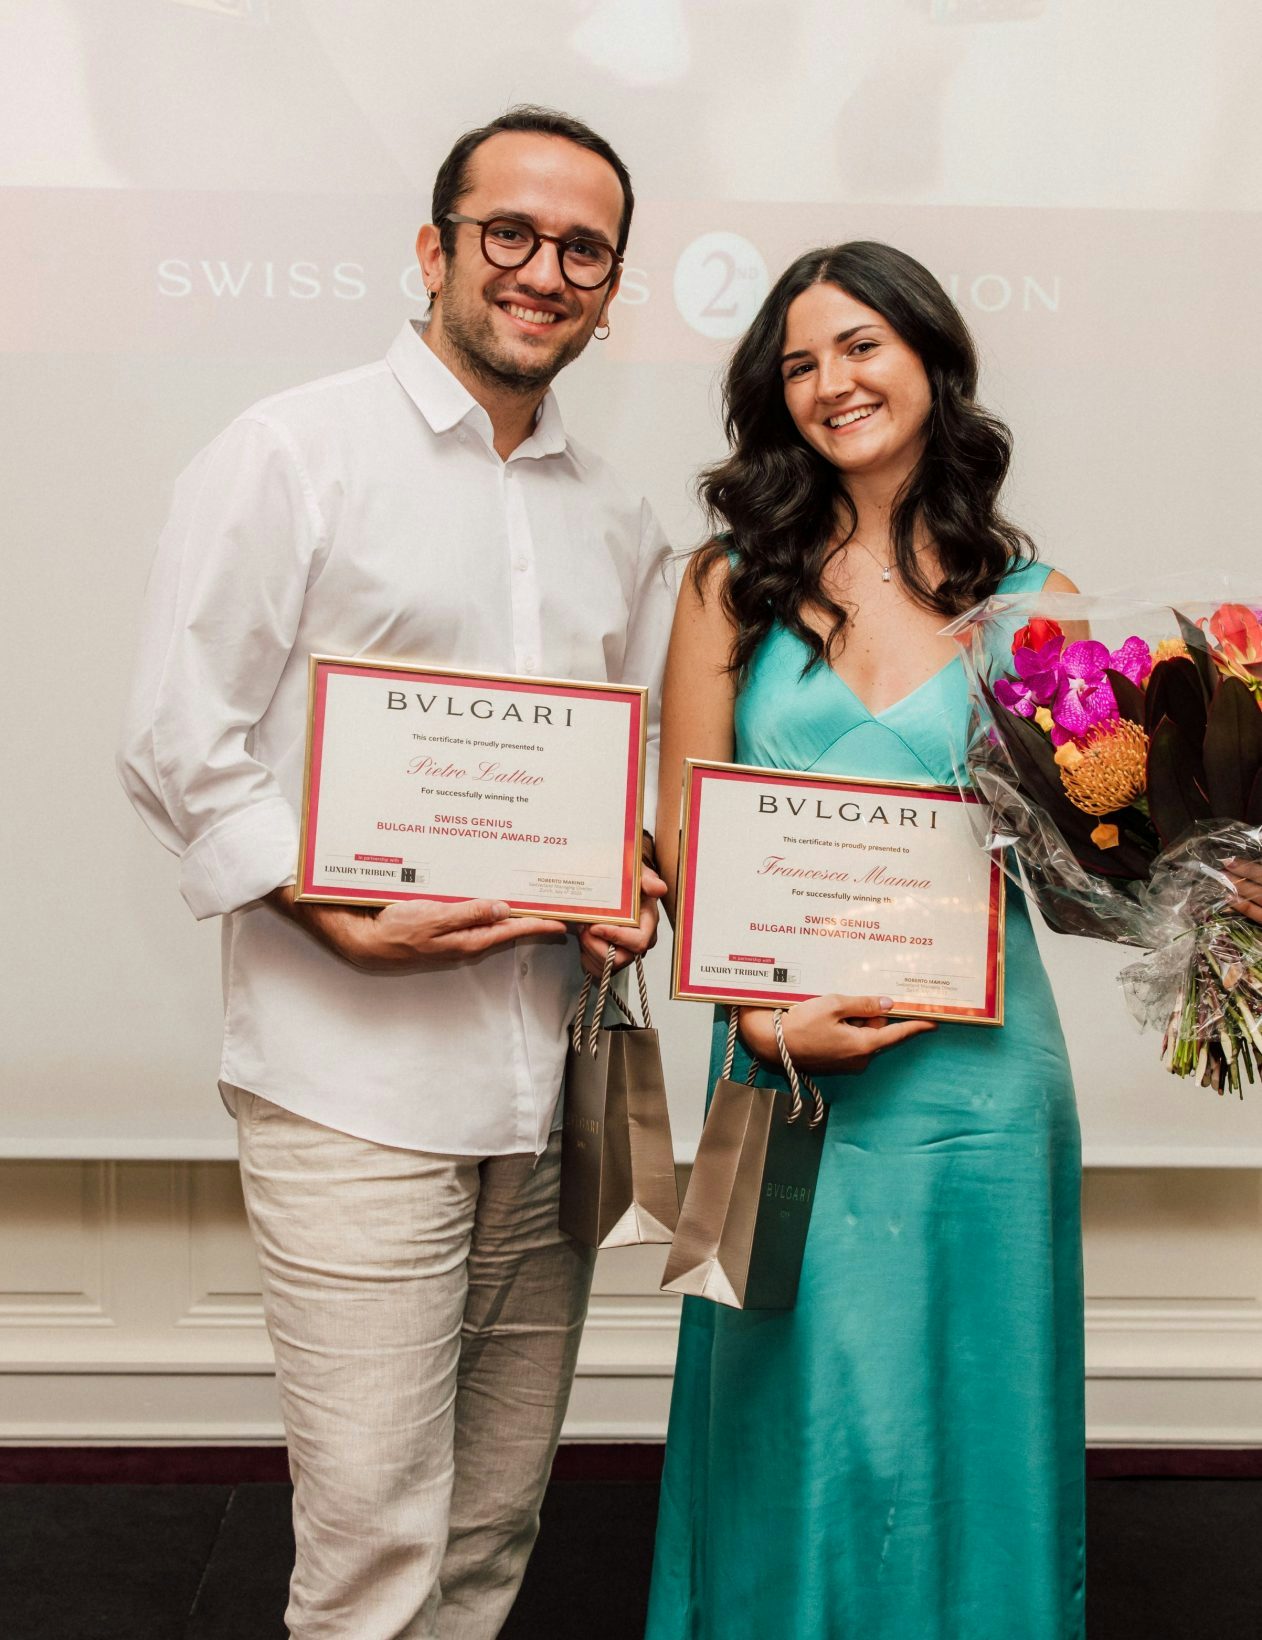 Bulgari Swiss Genius 2023 rewards young talents from the universities of Ticino and Zurich